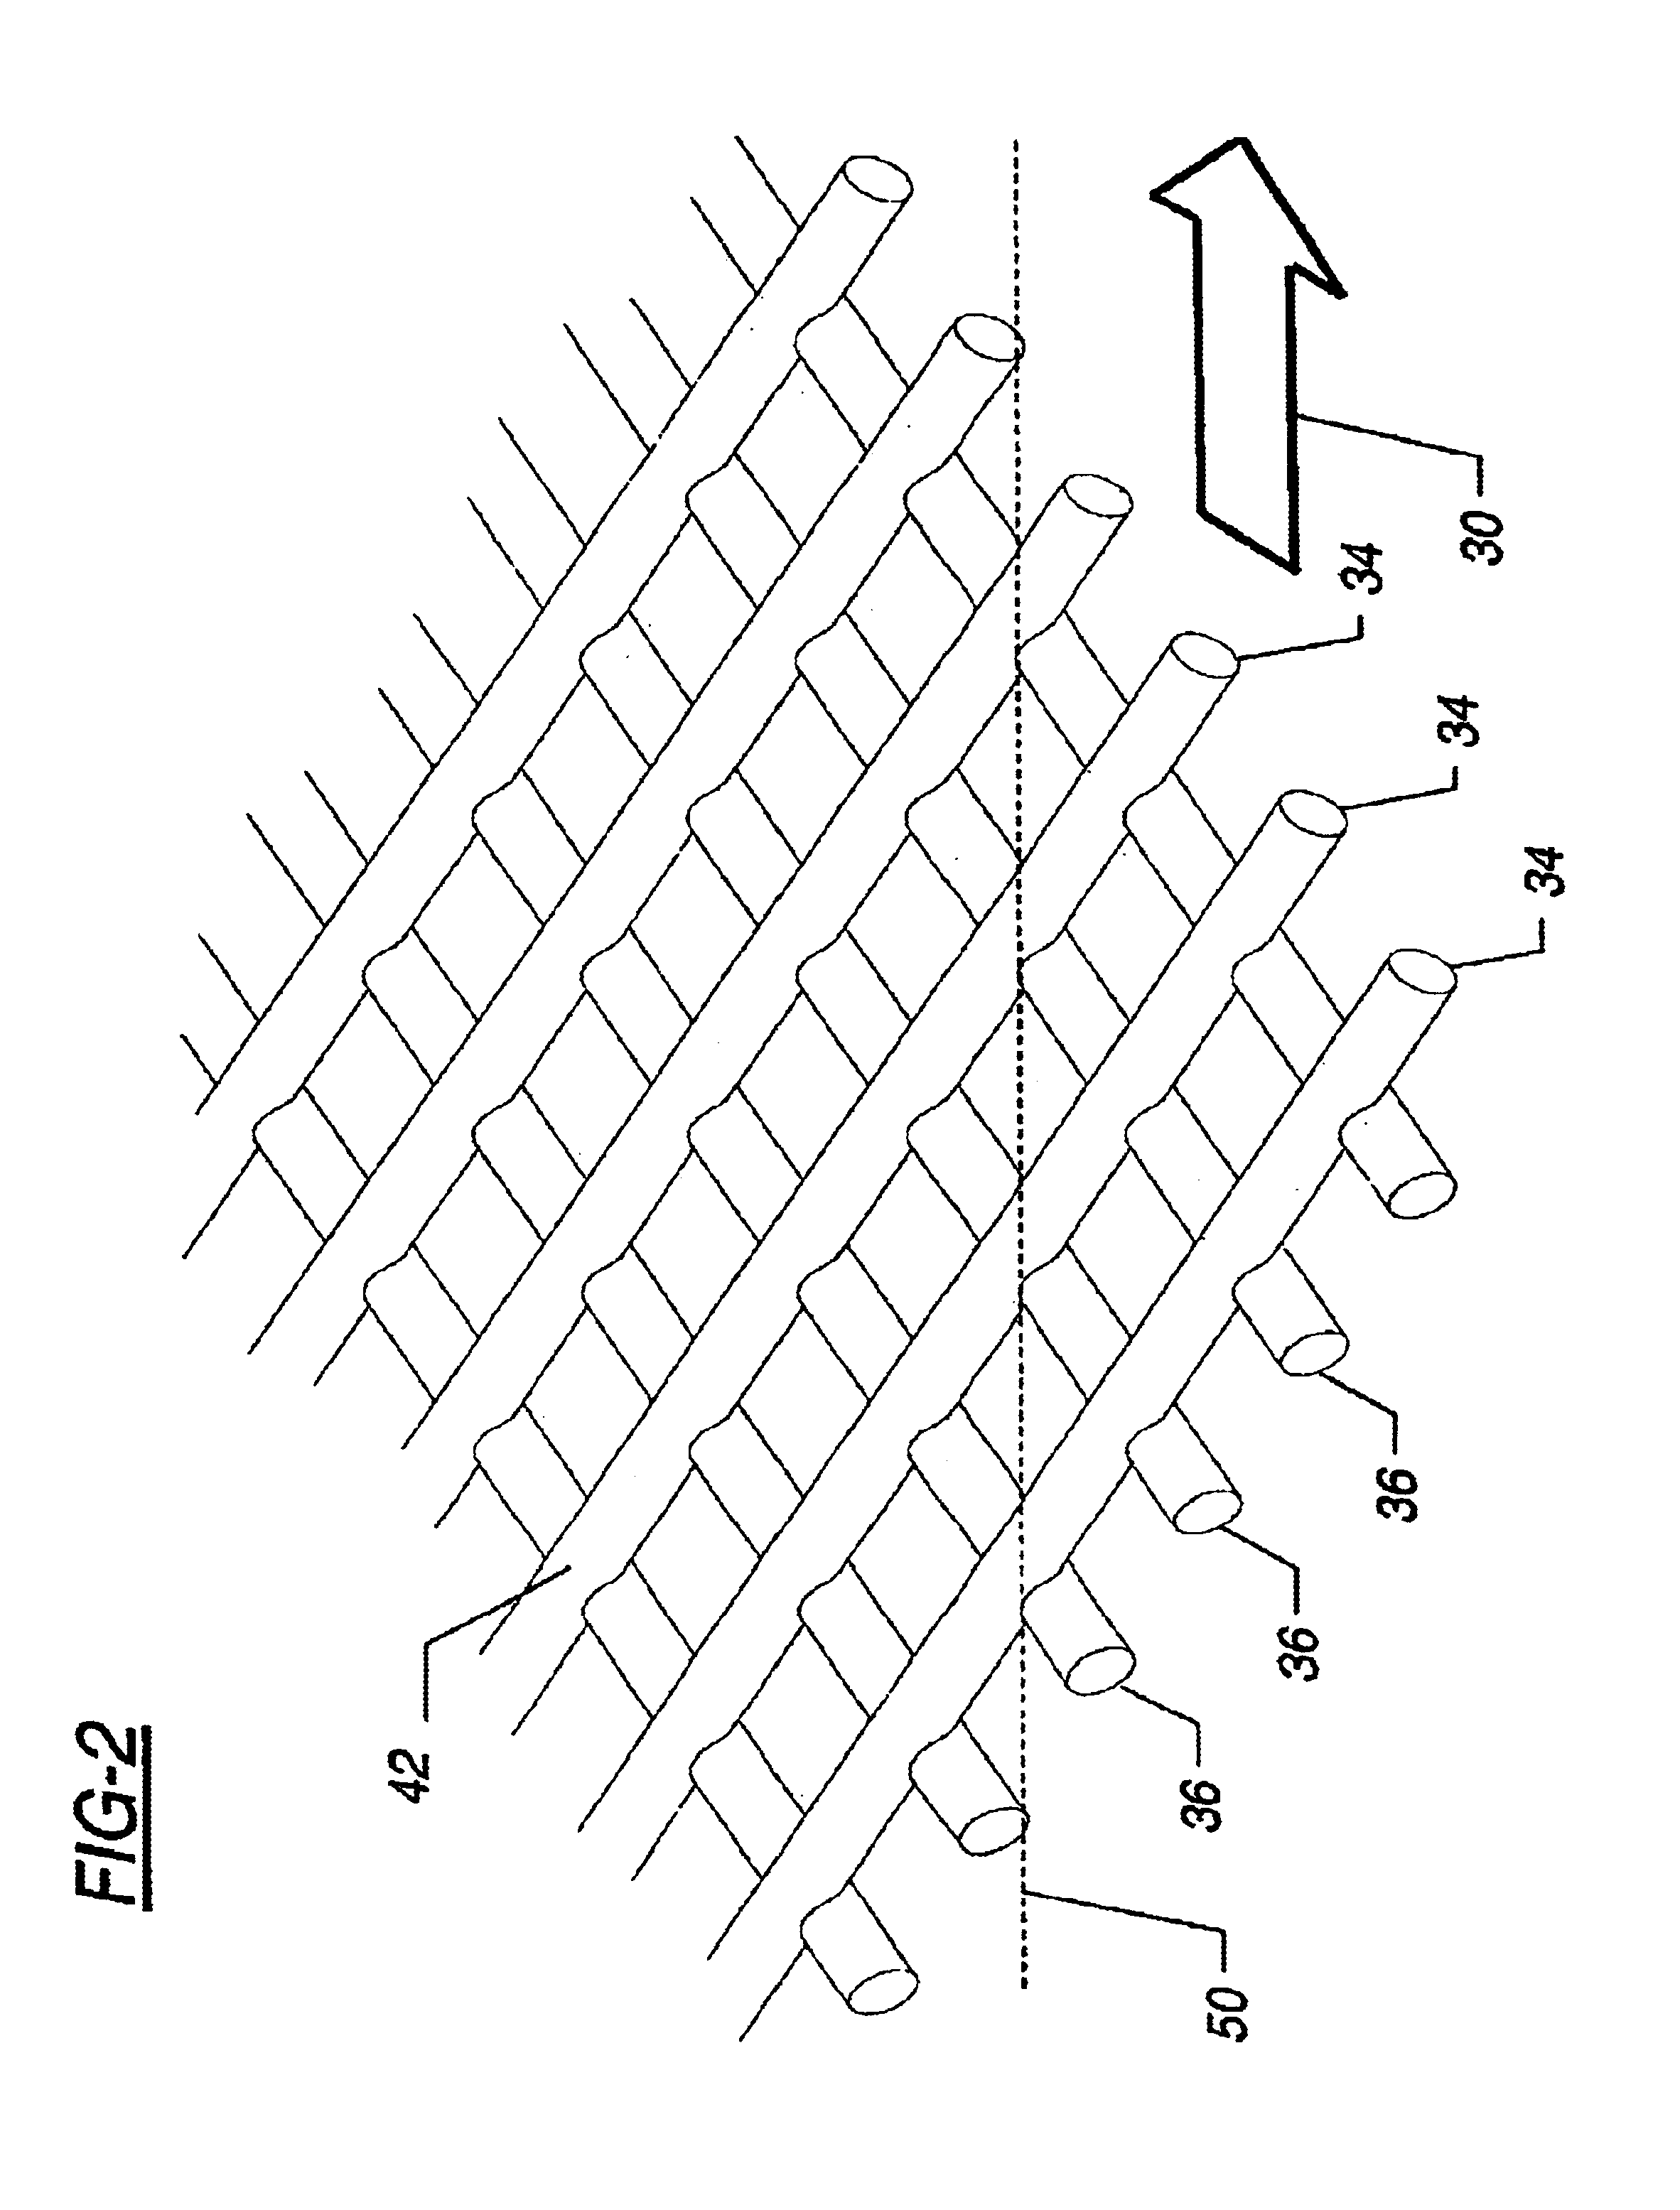 Spiral wound element with improved feed space